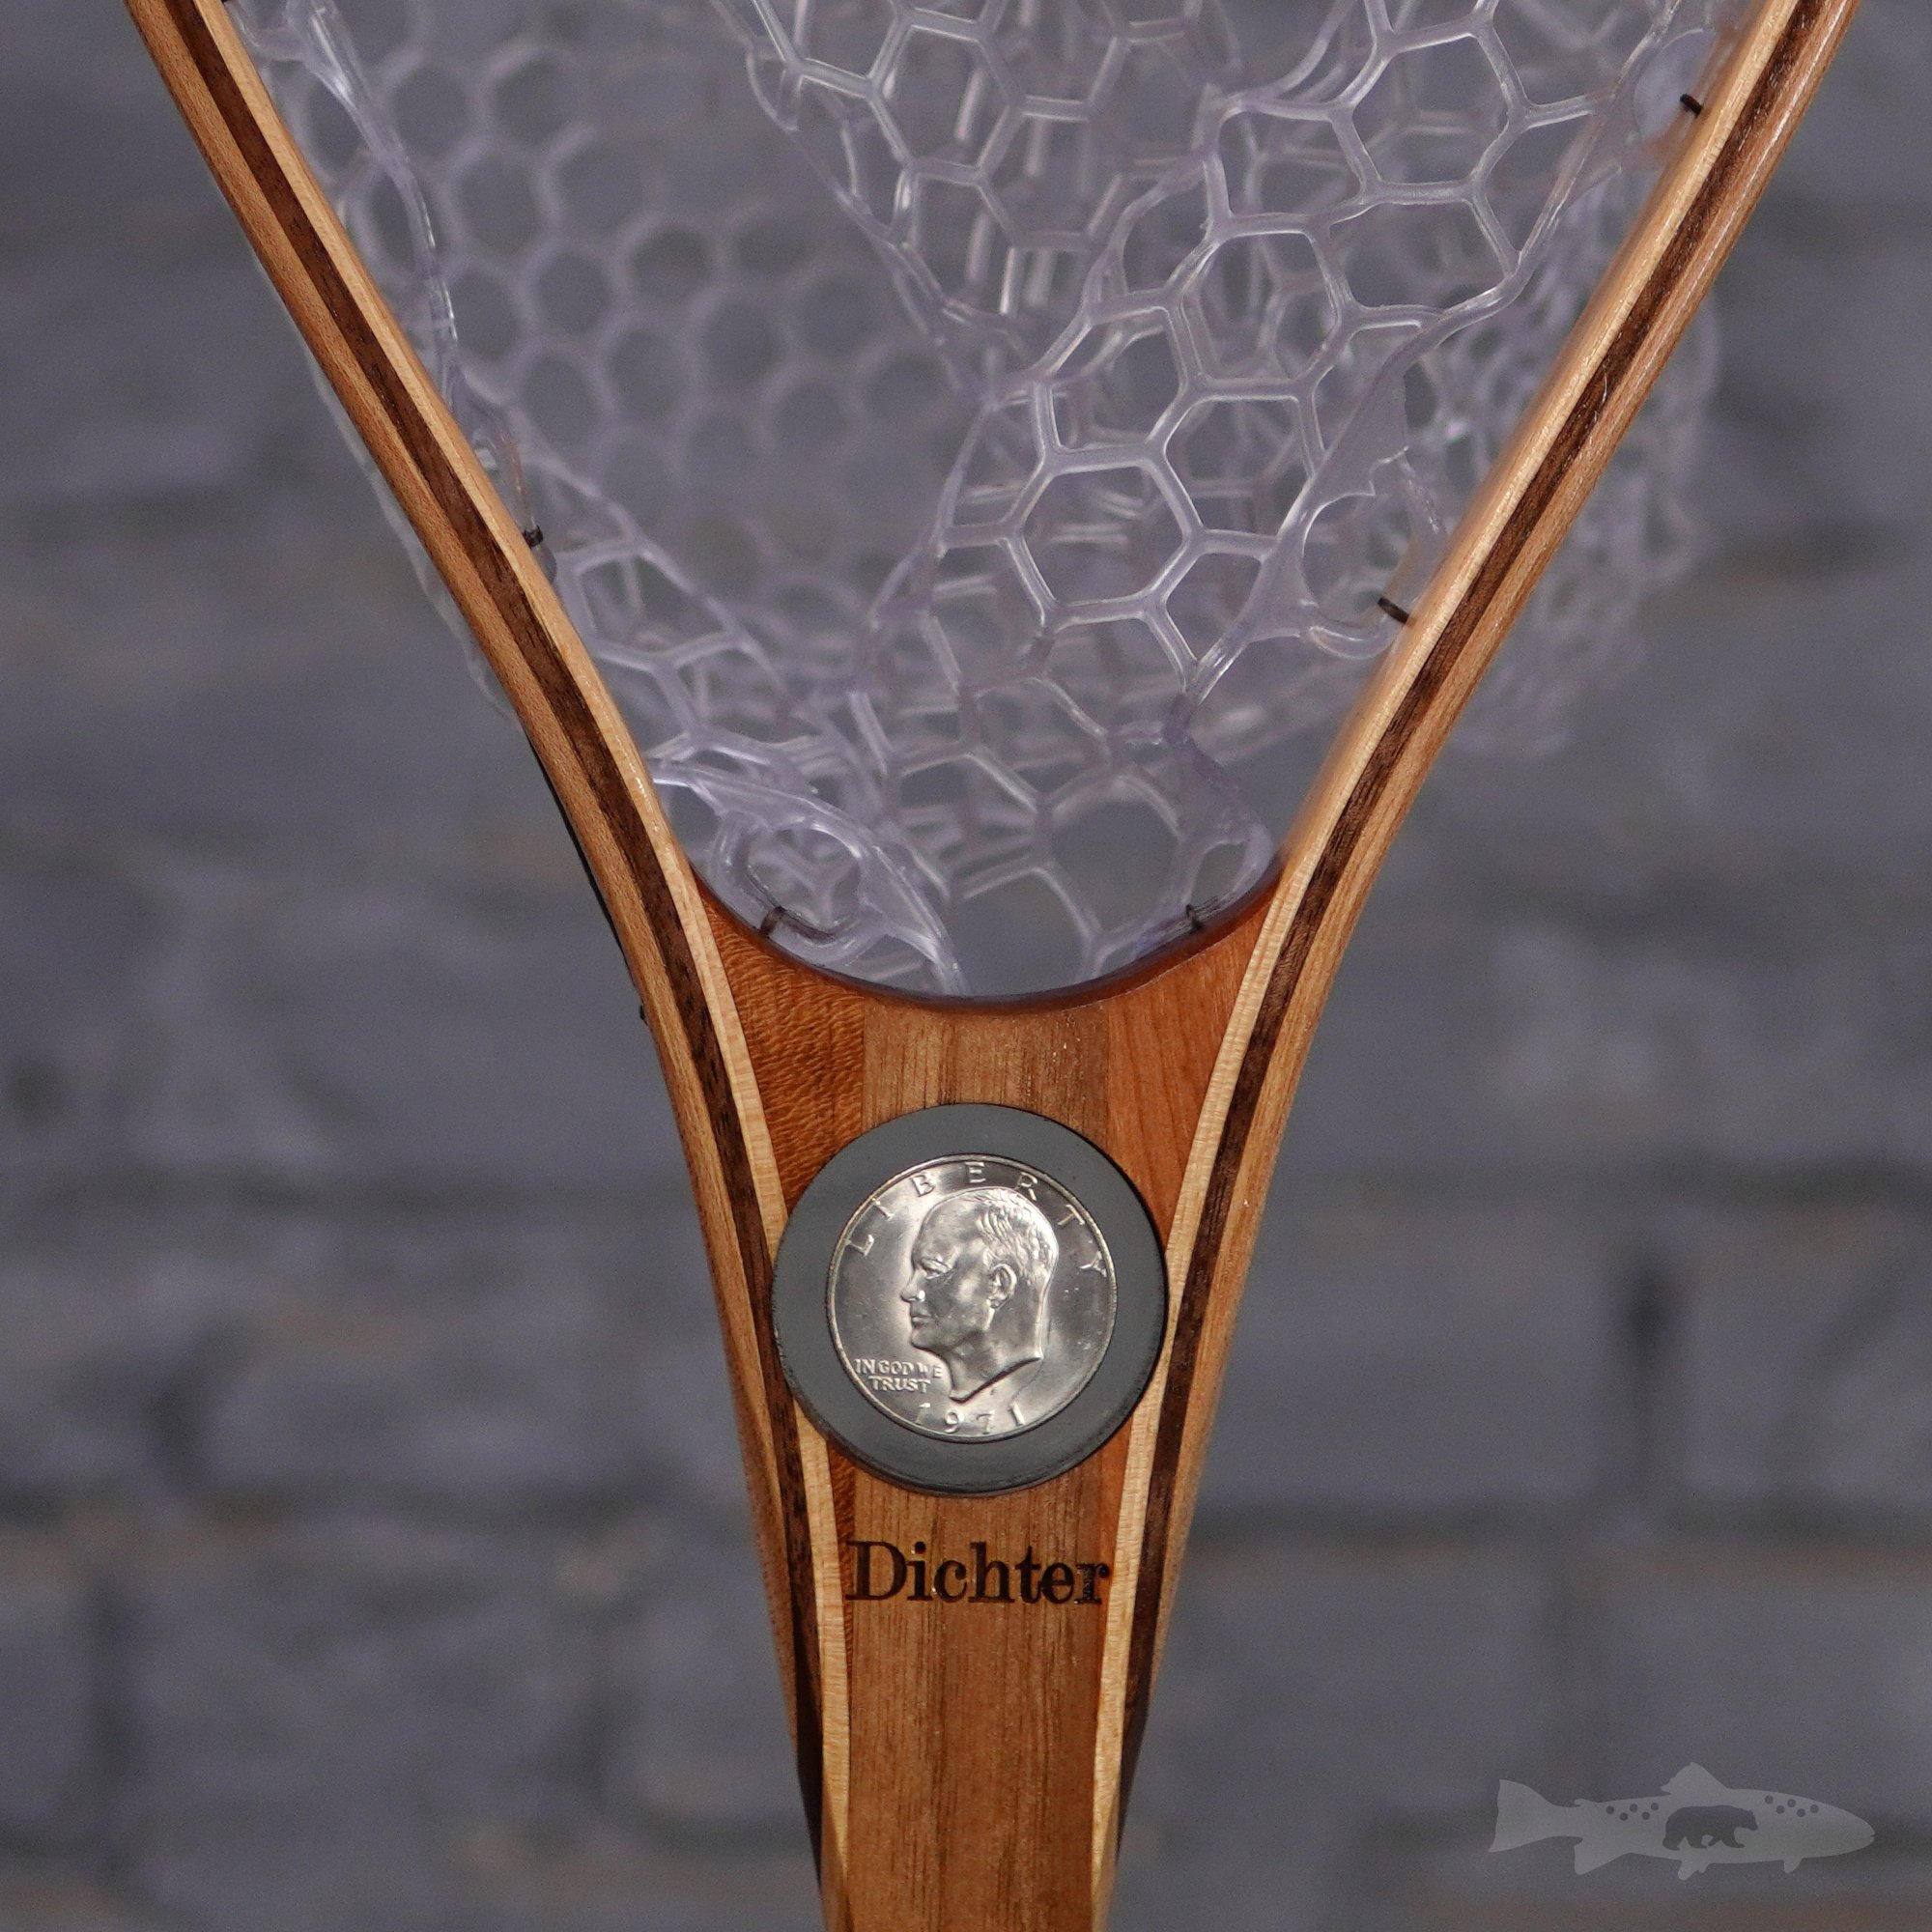 war medal object inlay fly fishing landing net hand made with wooden  customization — Wayward Handcrafted Fly Fishing Gear - made in Philadelphia  USAWood Fly Fishing net - Handcrafted Custom Fly Fishing